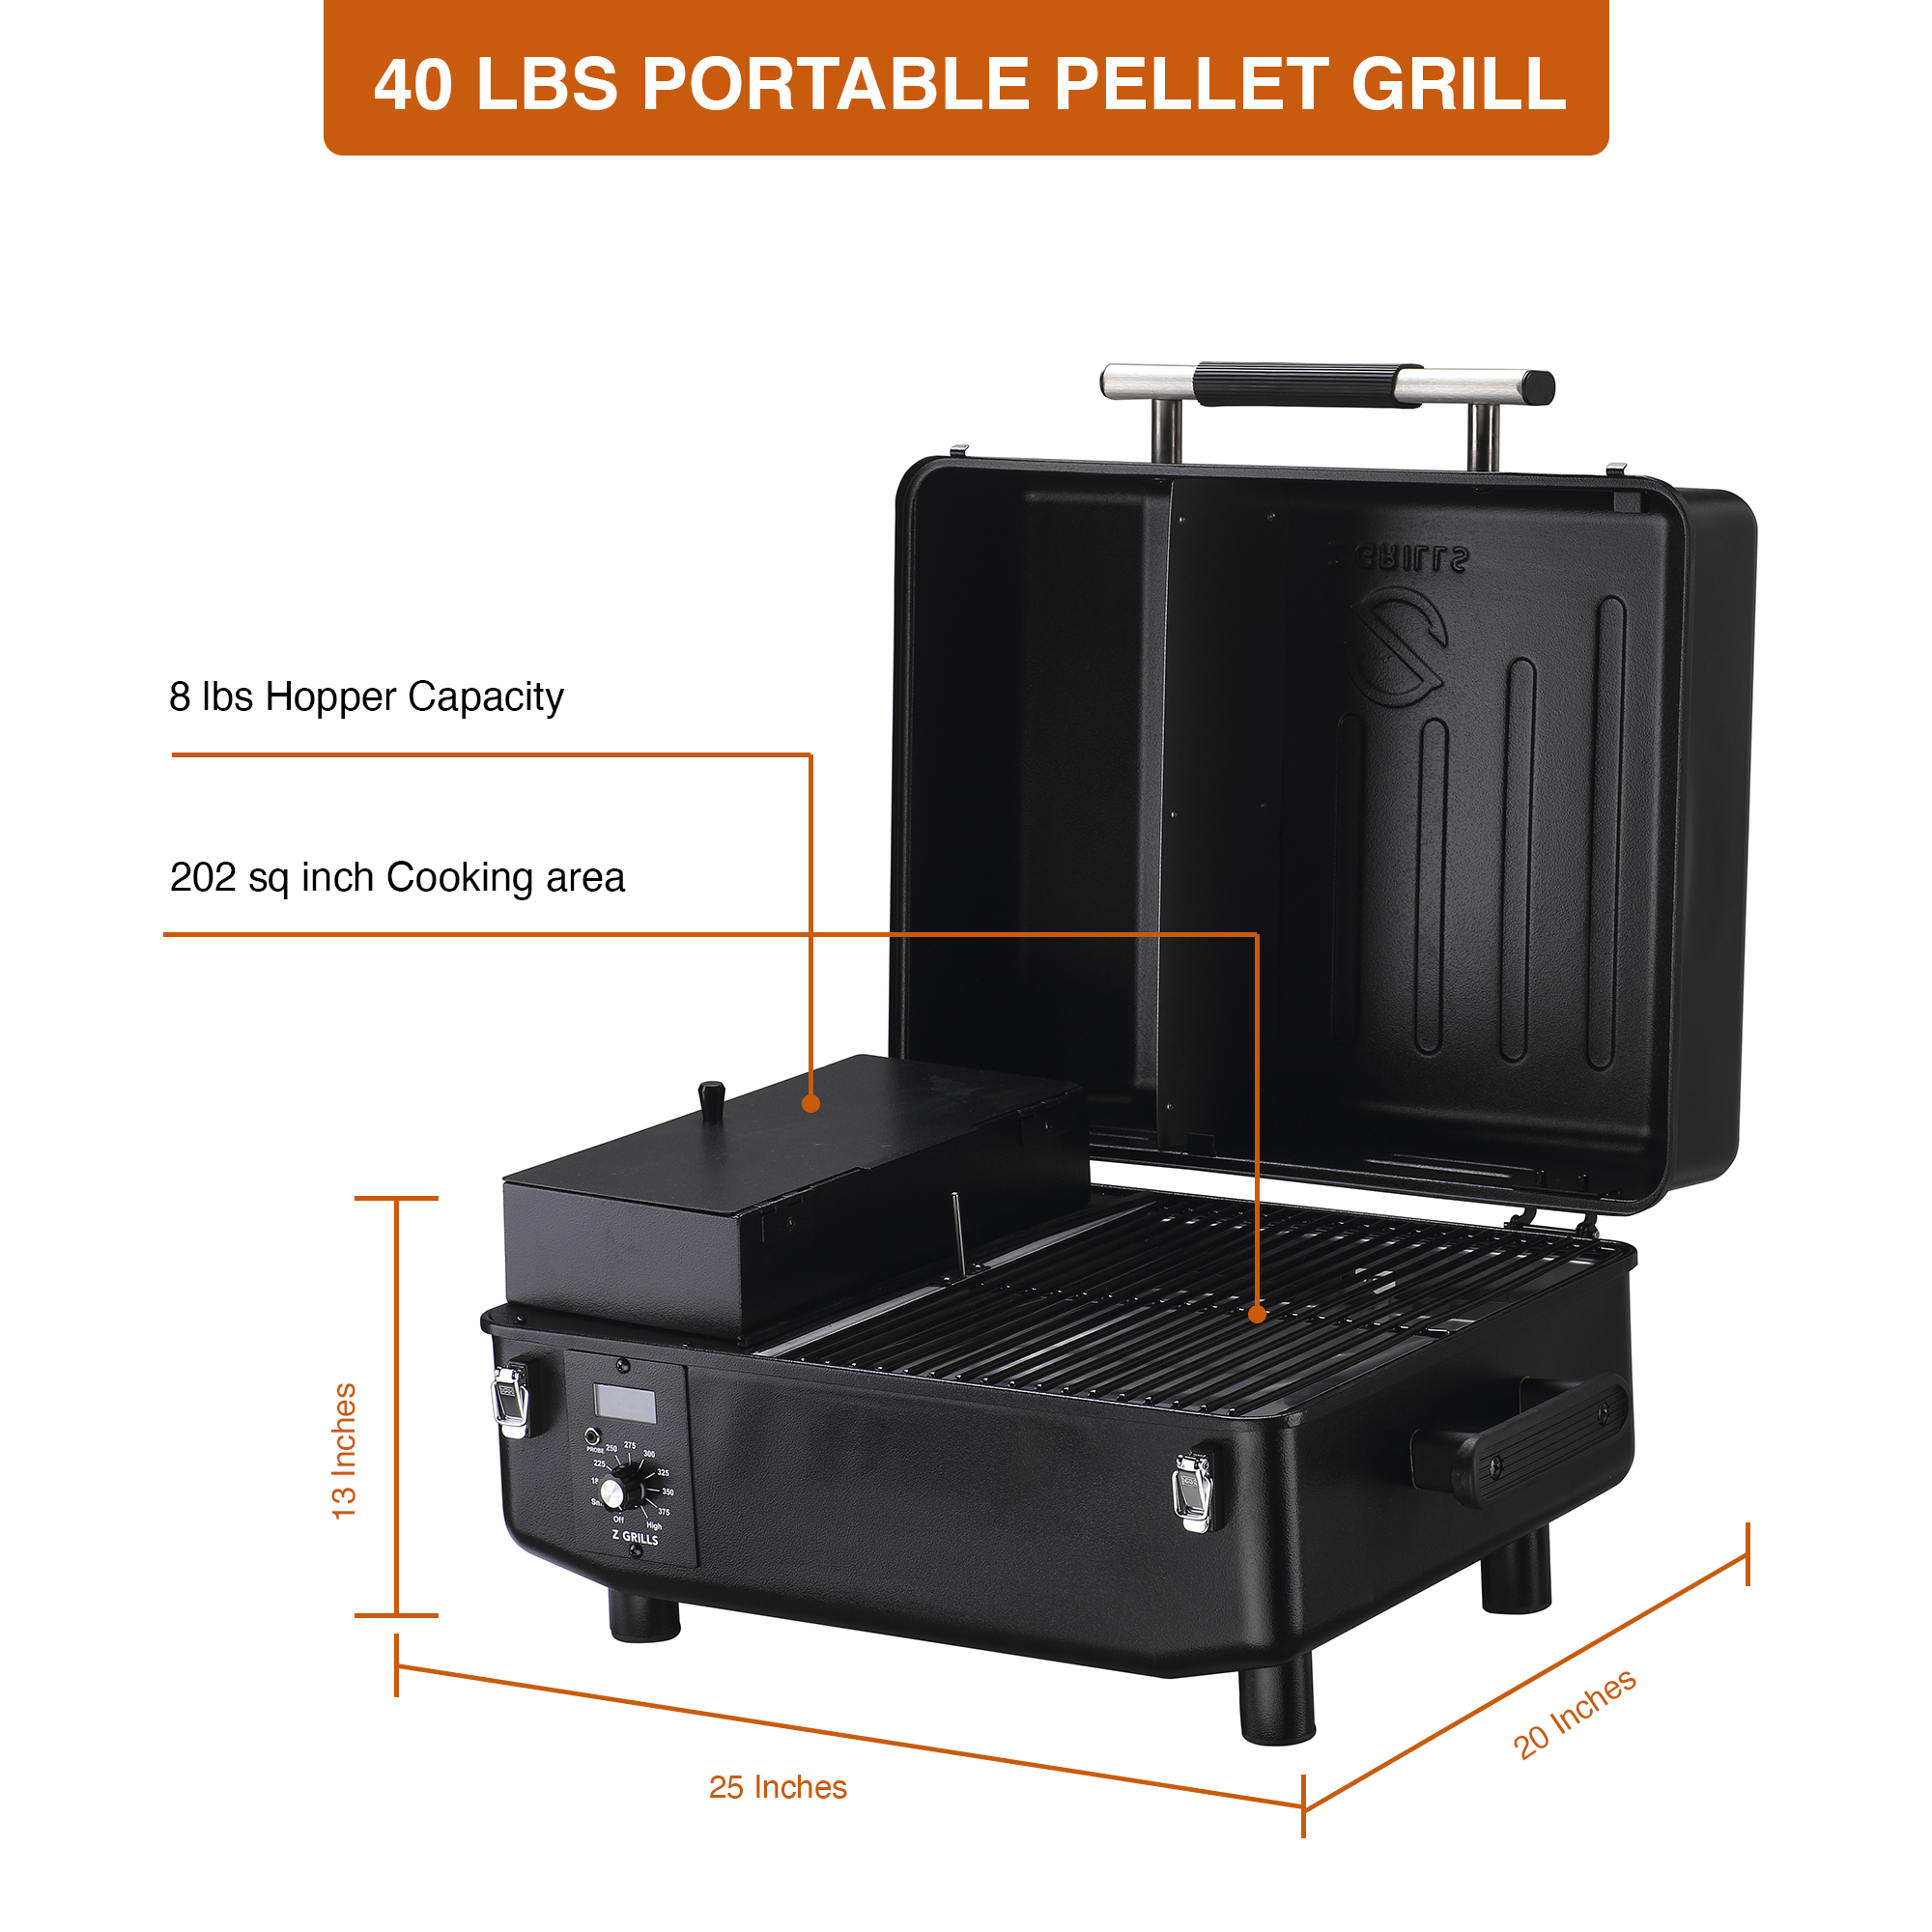 Z GRILLS ZPG-200A Portable Pellet Grill & Electric Smoker – Camping BBQ Combo with Auto Temperature Control - image 3 of 10